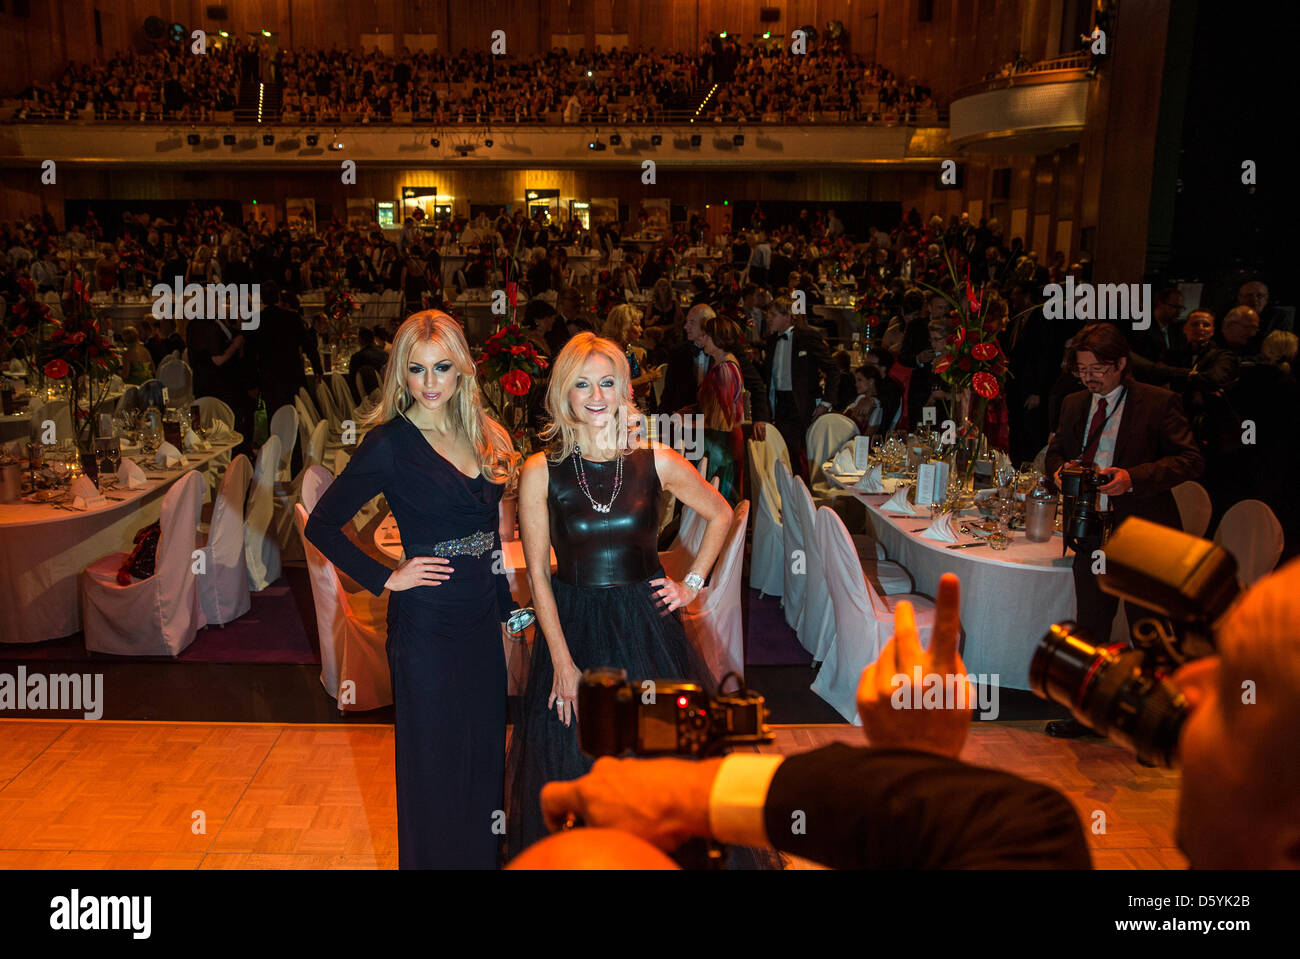 Rosanna Davison (L), daughter of singer Chris de Burgh, and presenter Frauke Ludowig pose for photographs during the Leipzig Opera Ball at the Opera House in Leipzig, germany, 27 October 2012. The Opera Ball supports the inititiative 'Leipzig helps children'. Photo: Oliver Killig Stock Photo